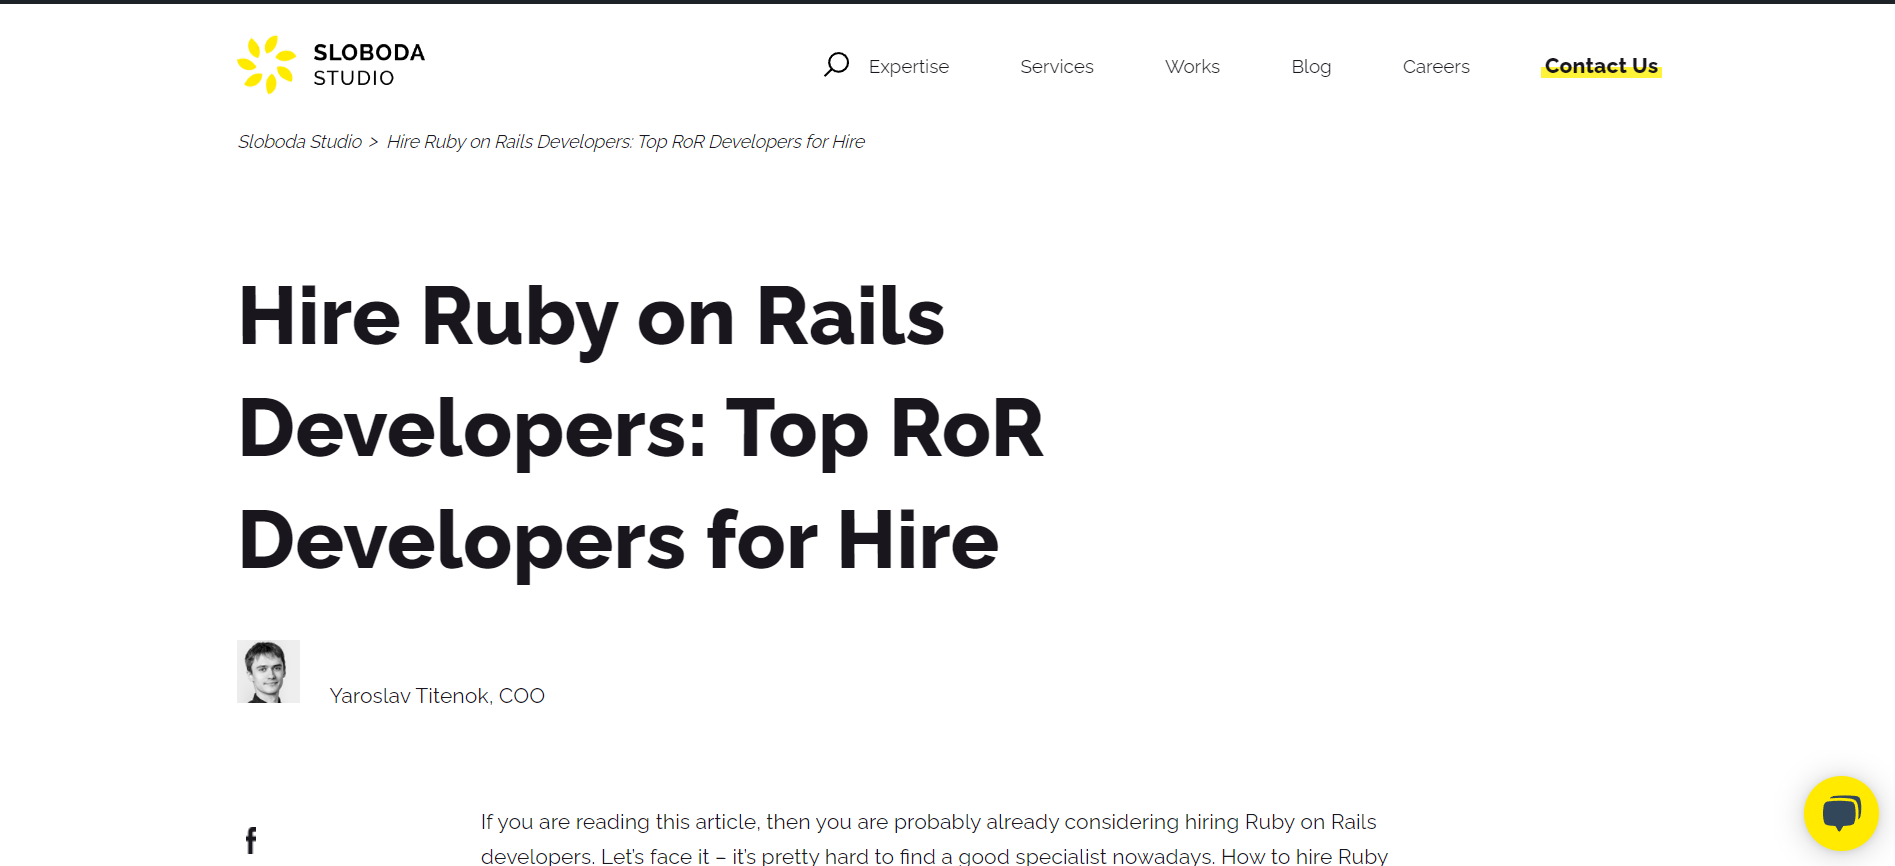 Hire Ruby on Rails Developers in 48 Hours